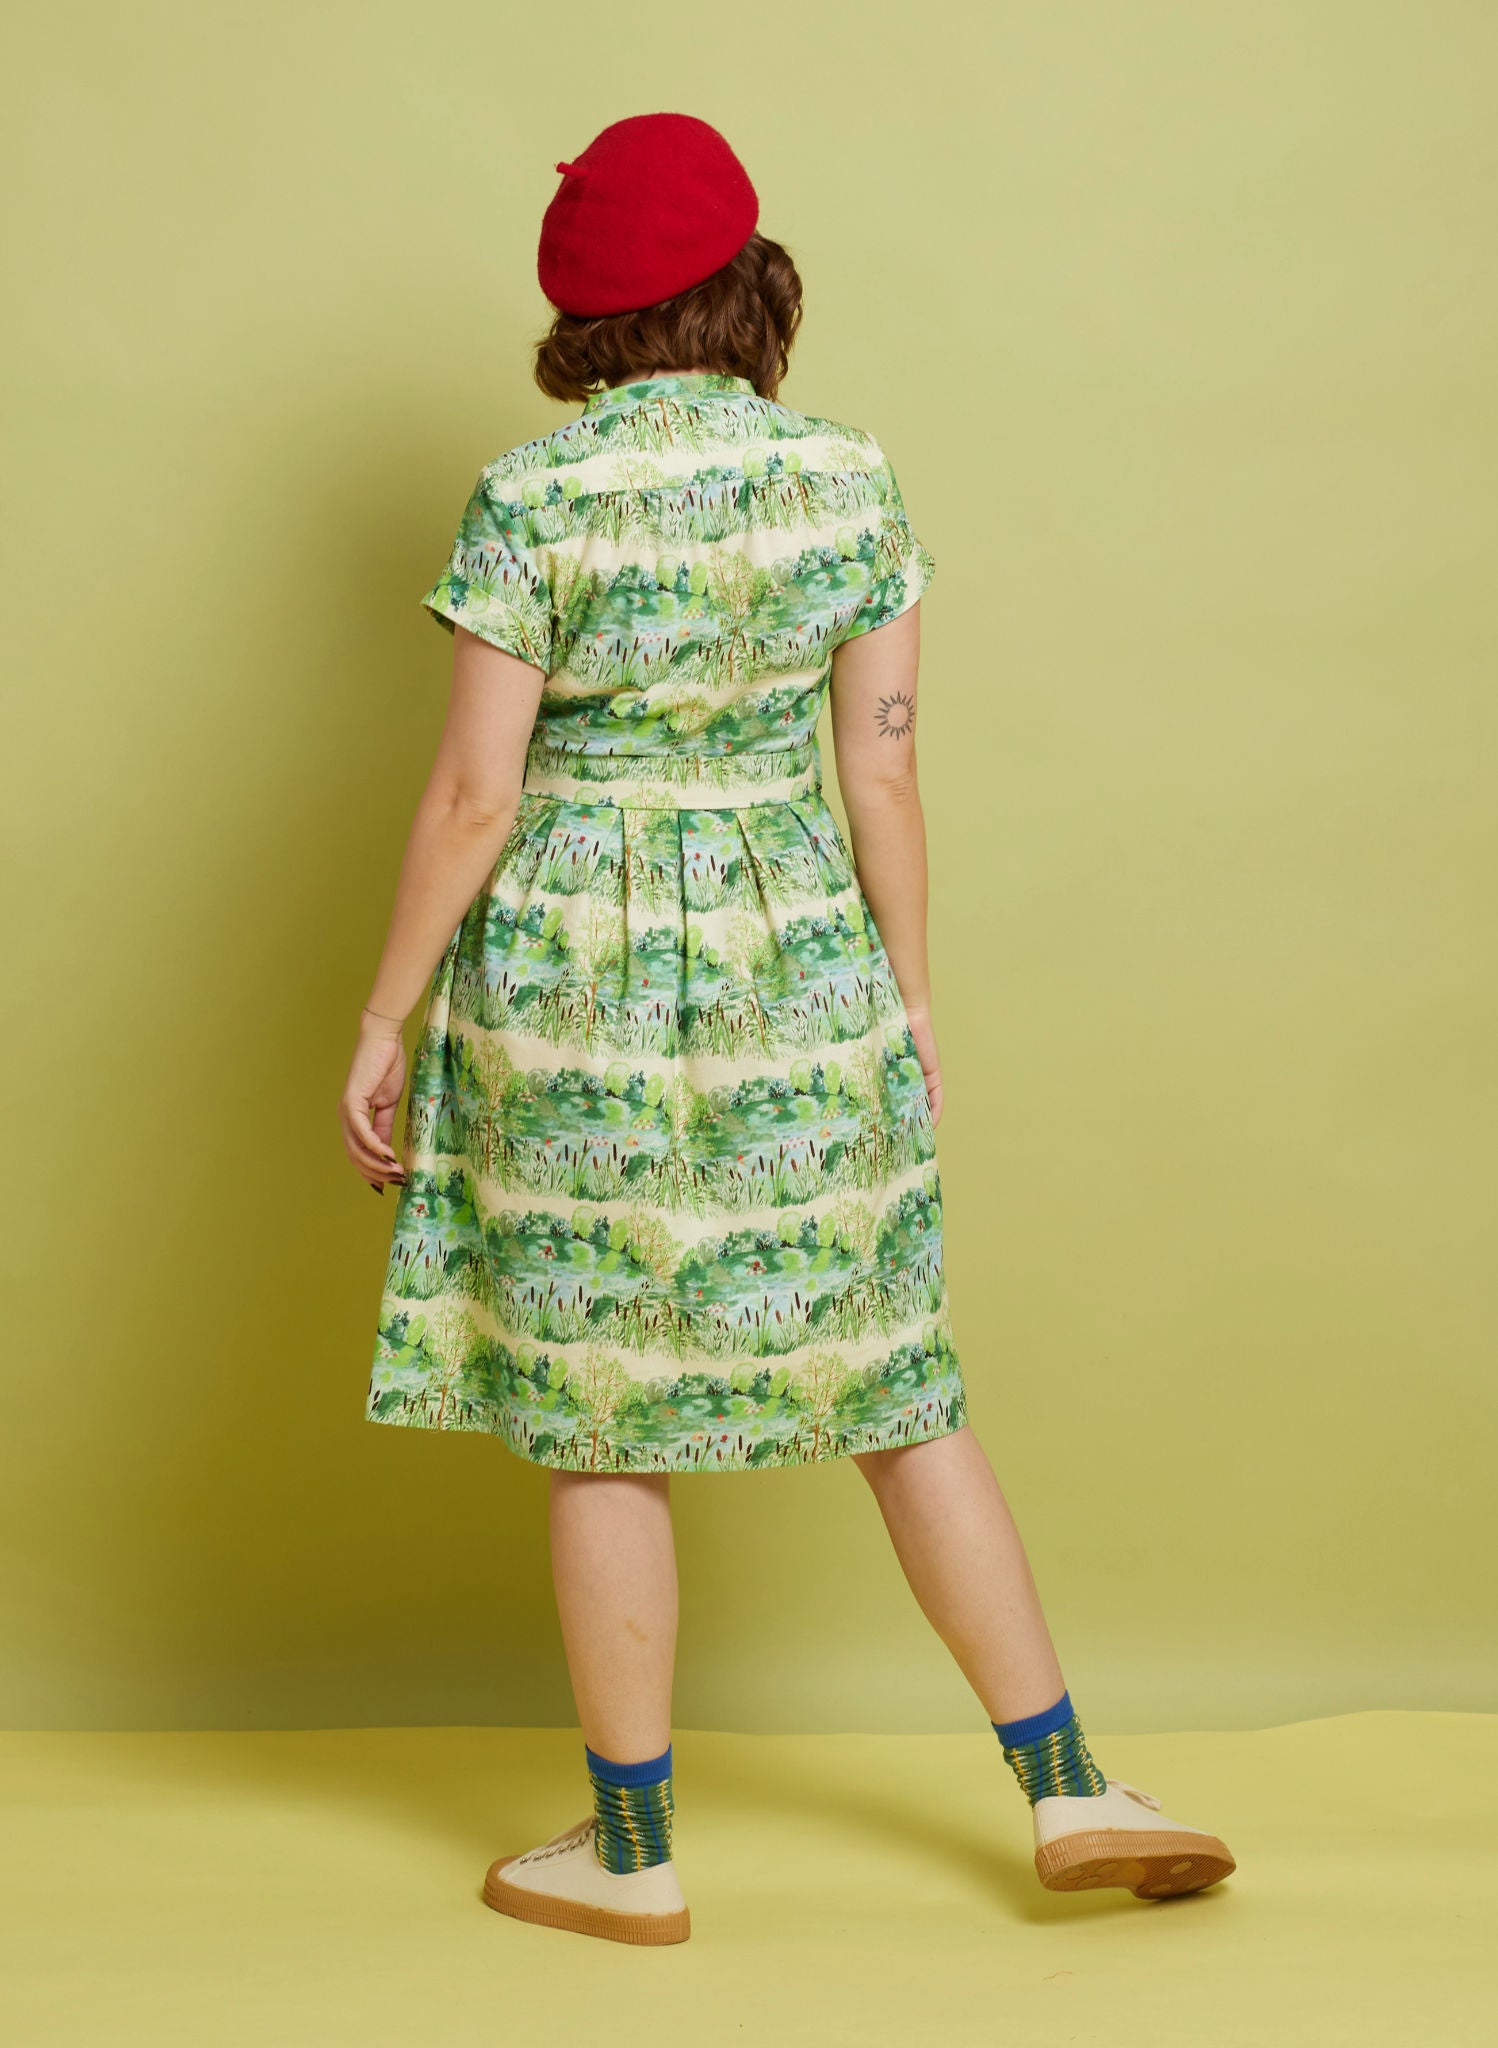 Green Wild Swimmers Dress | Cotton & Linen | Made in UK